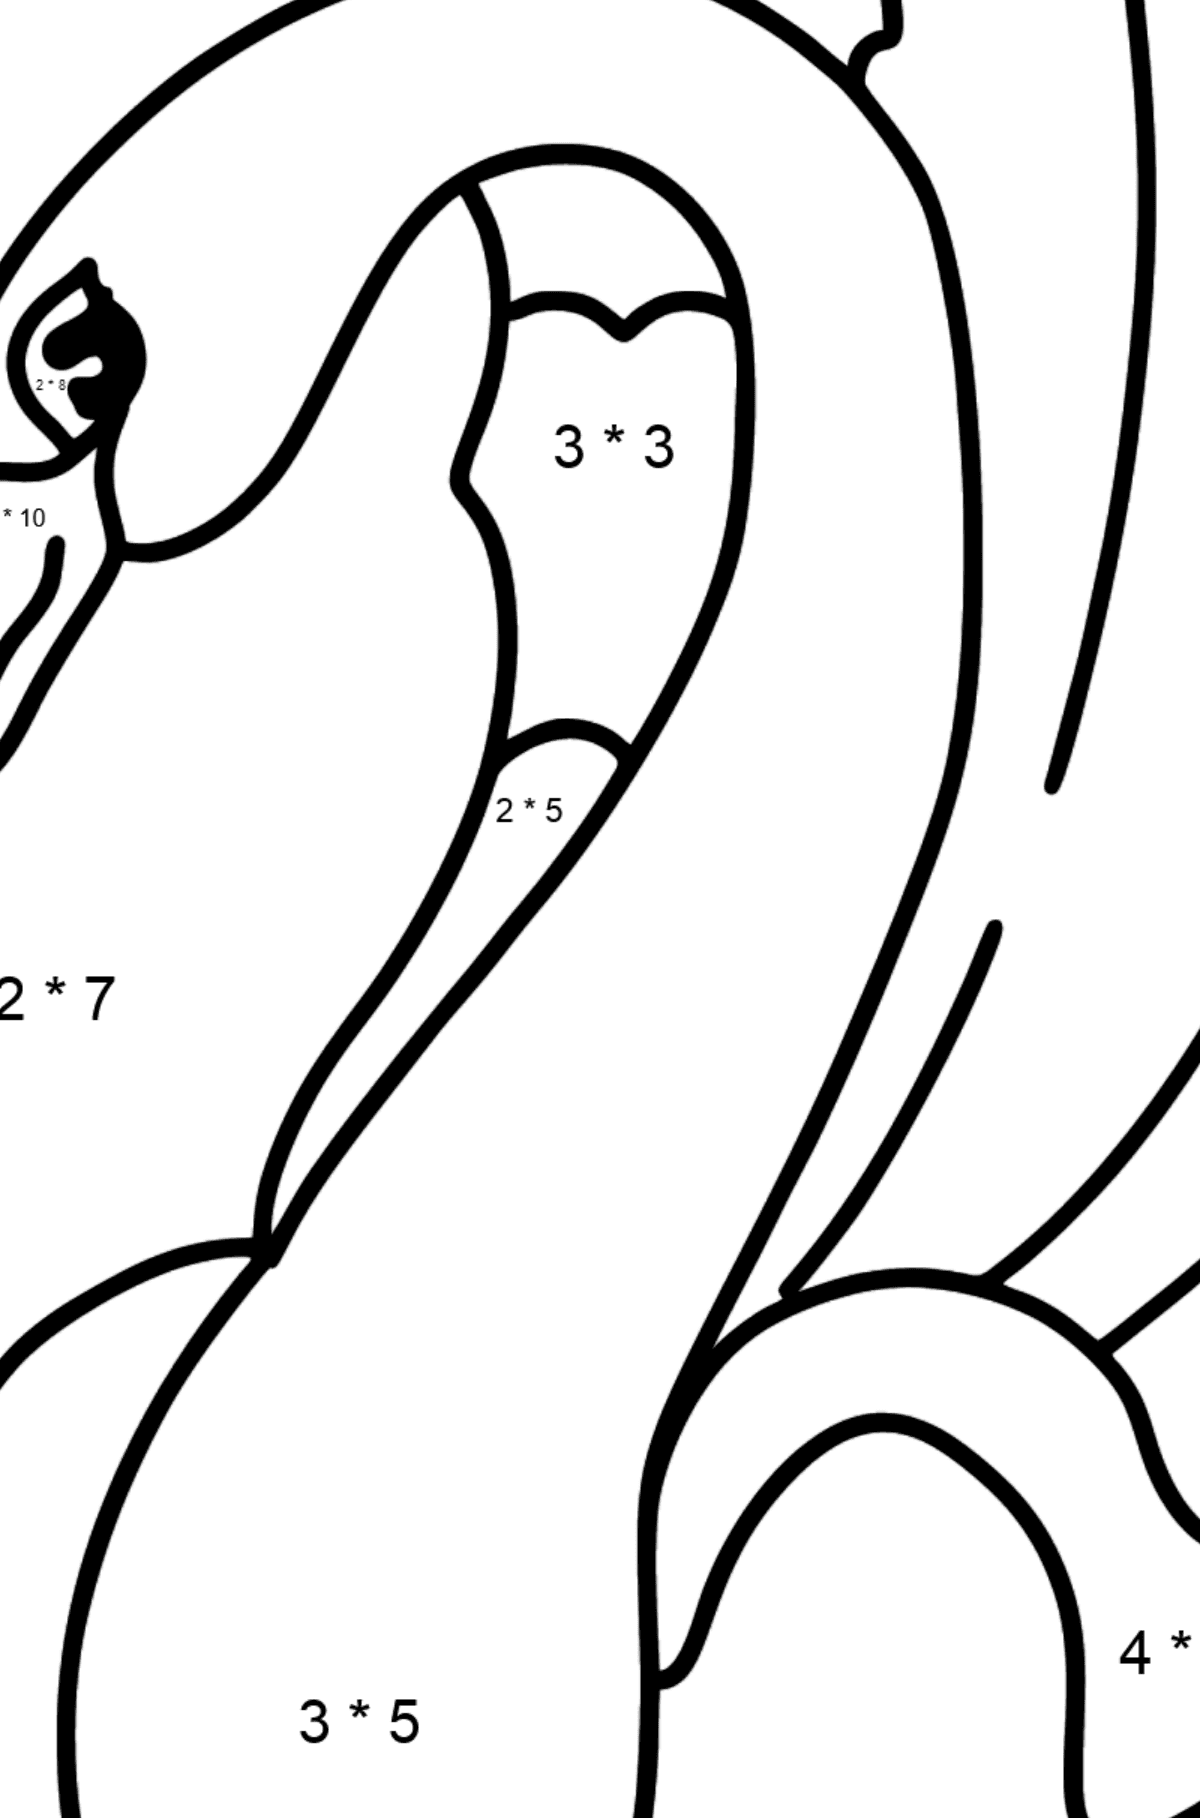 Black Swan coloring page - Math Coloring - Multiplication for Kids